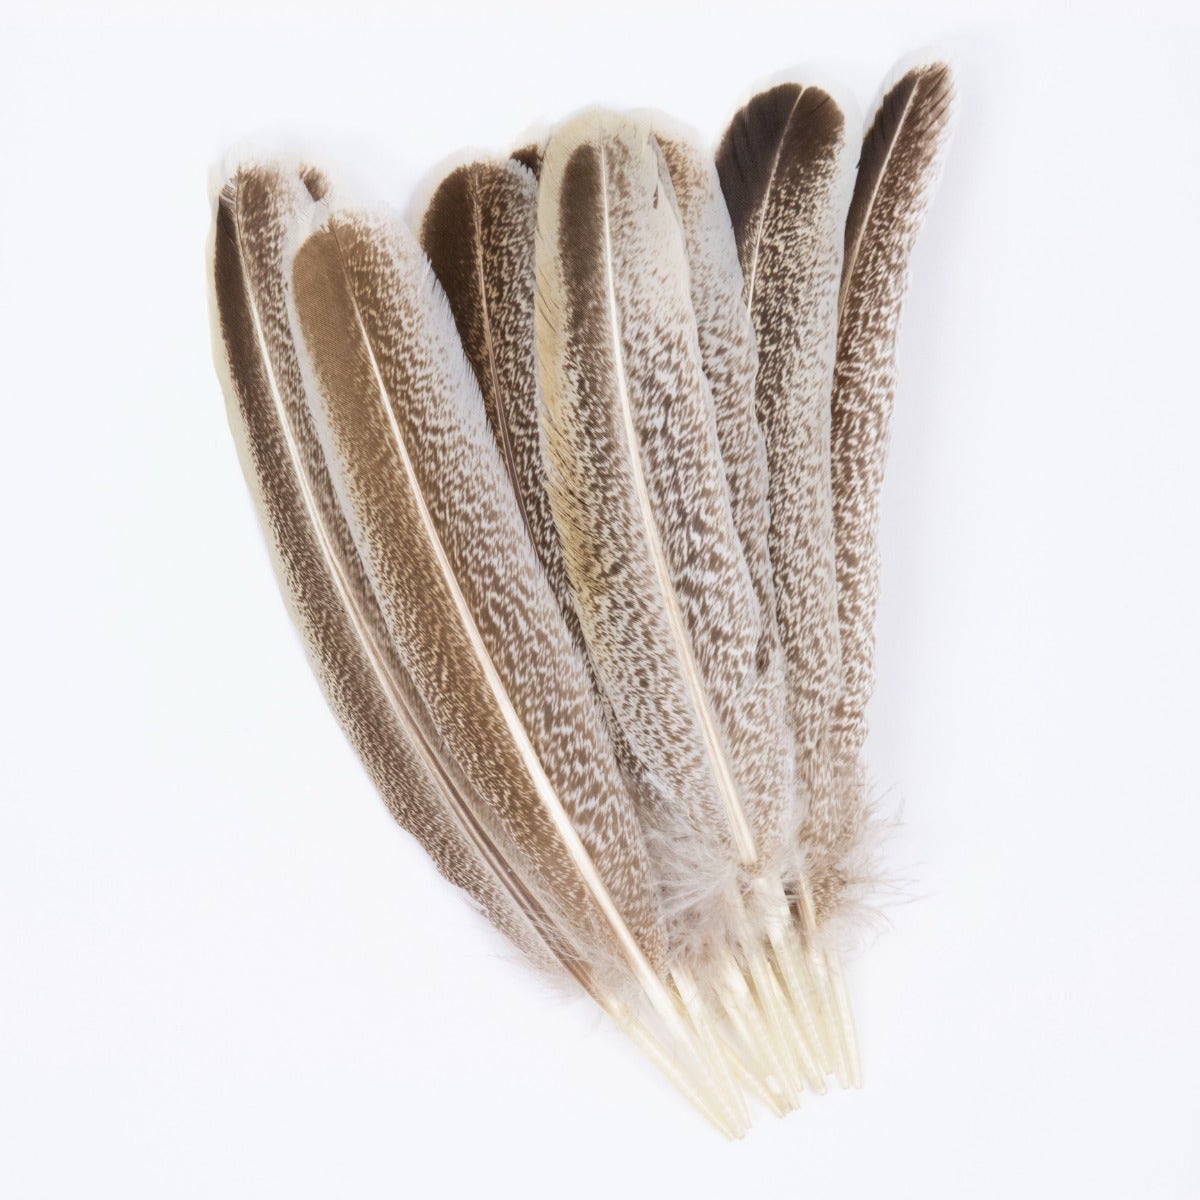 Cinnamon Turkey Quills Selected Feathers - Natural